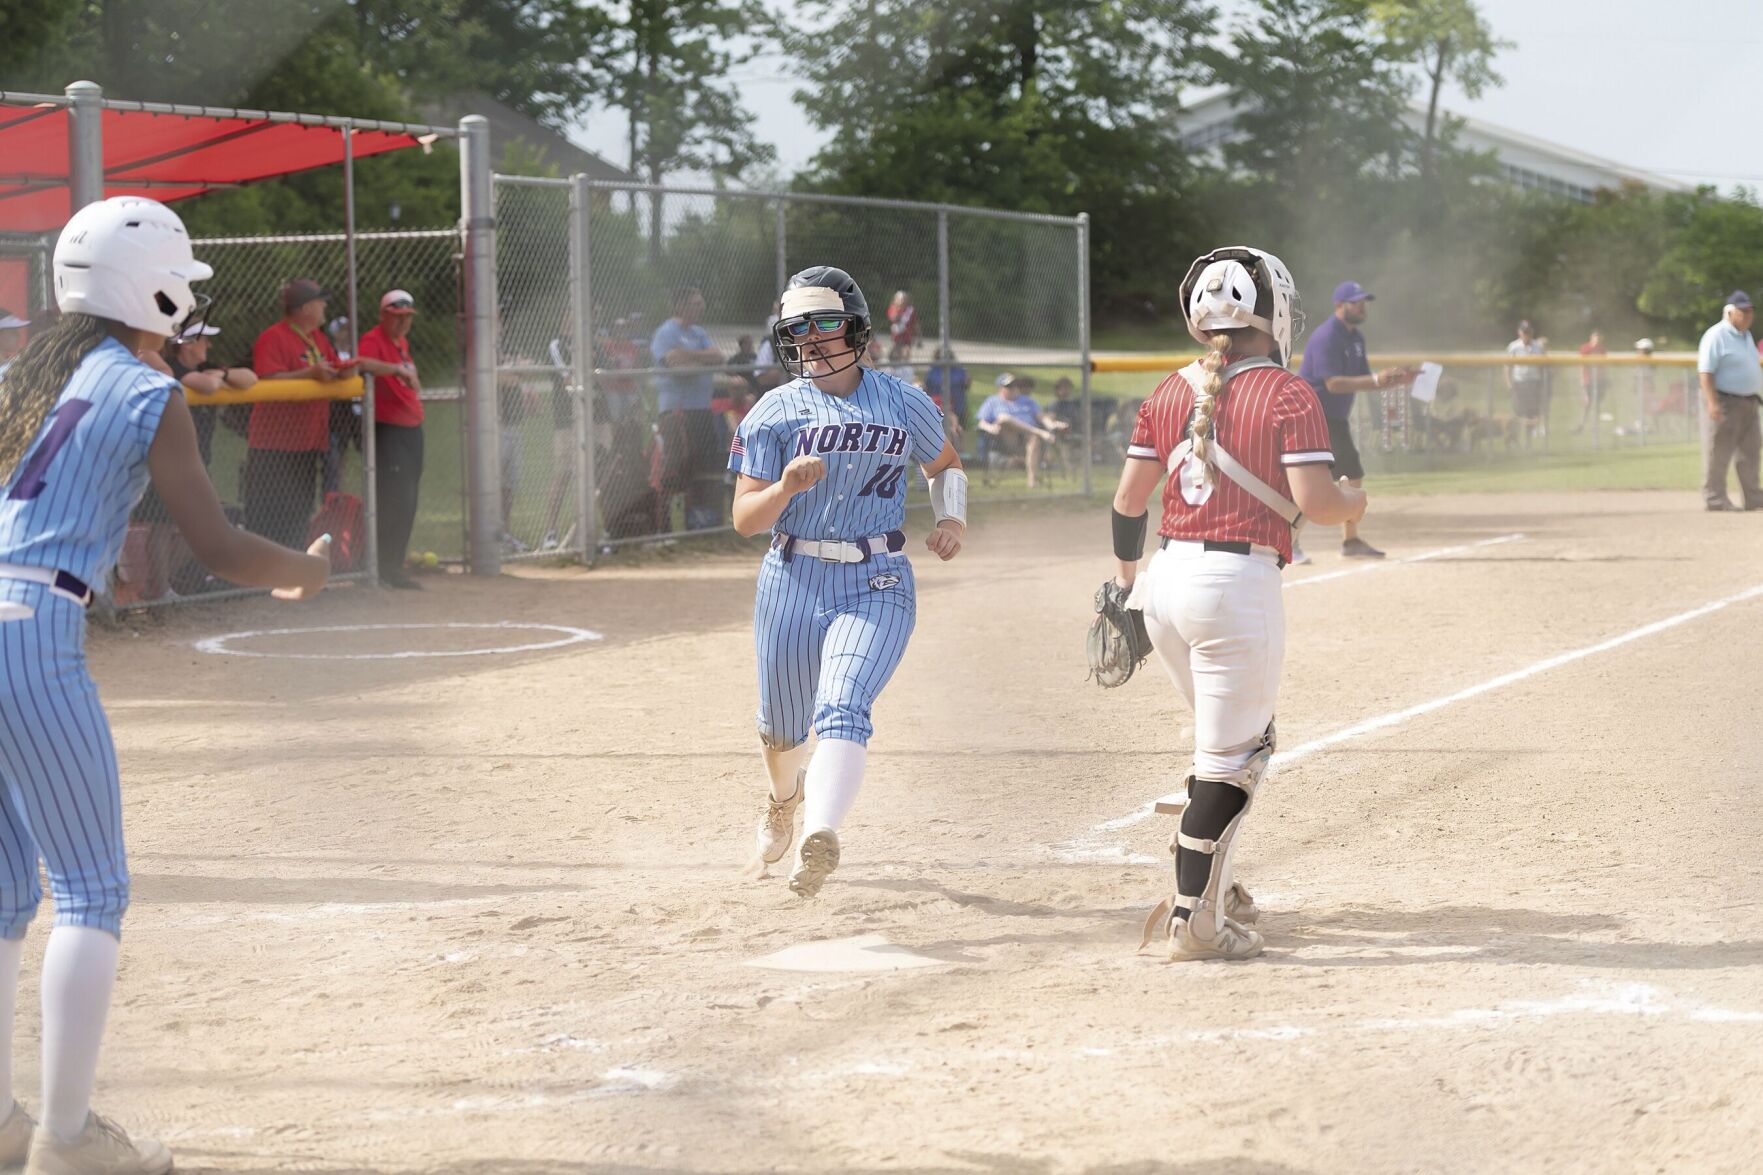 Waukesha North Softball Team Eyes Conference Title with Key Players Leading the Way